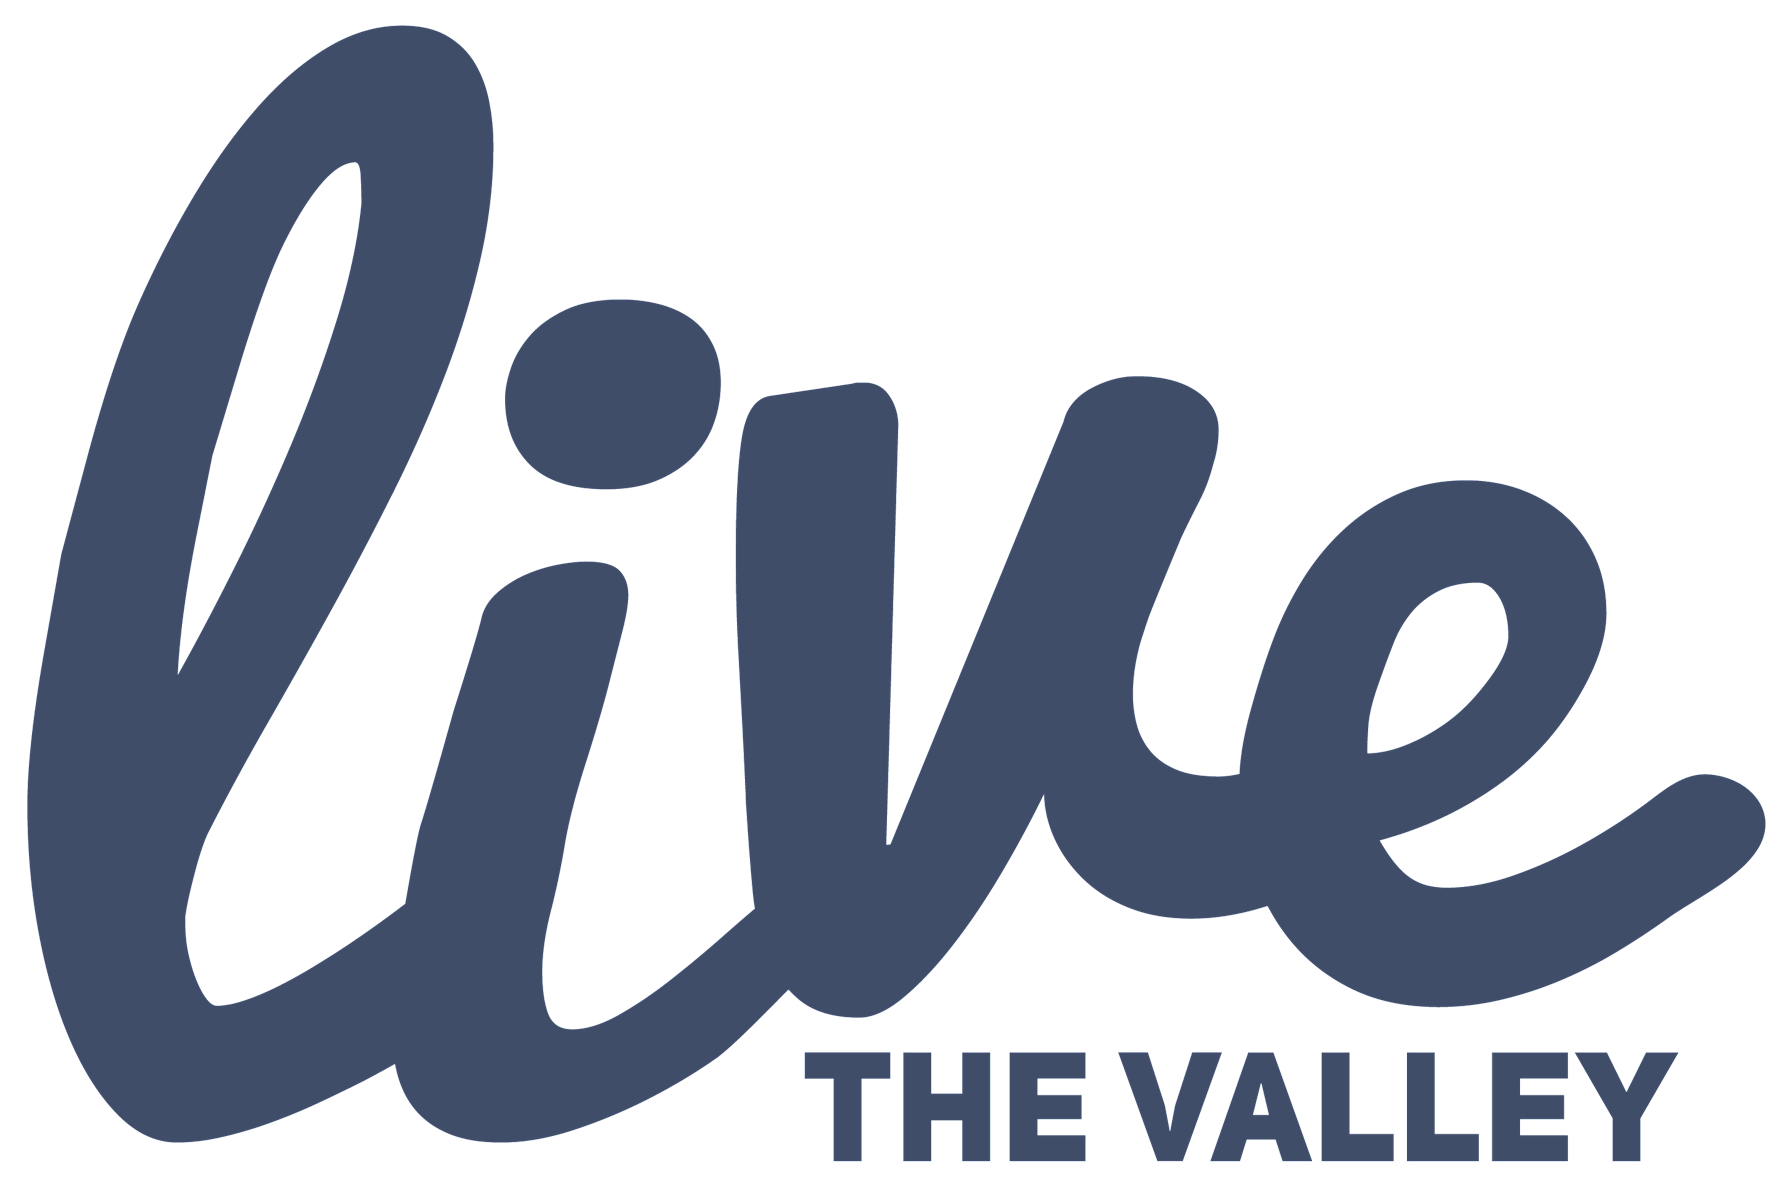 Live the Valley